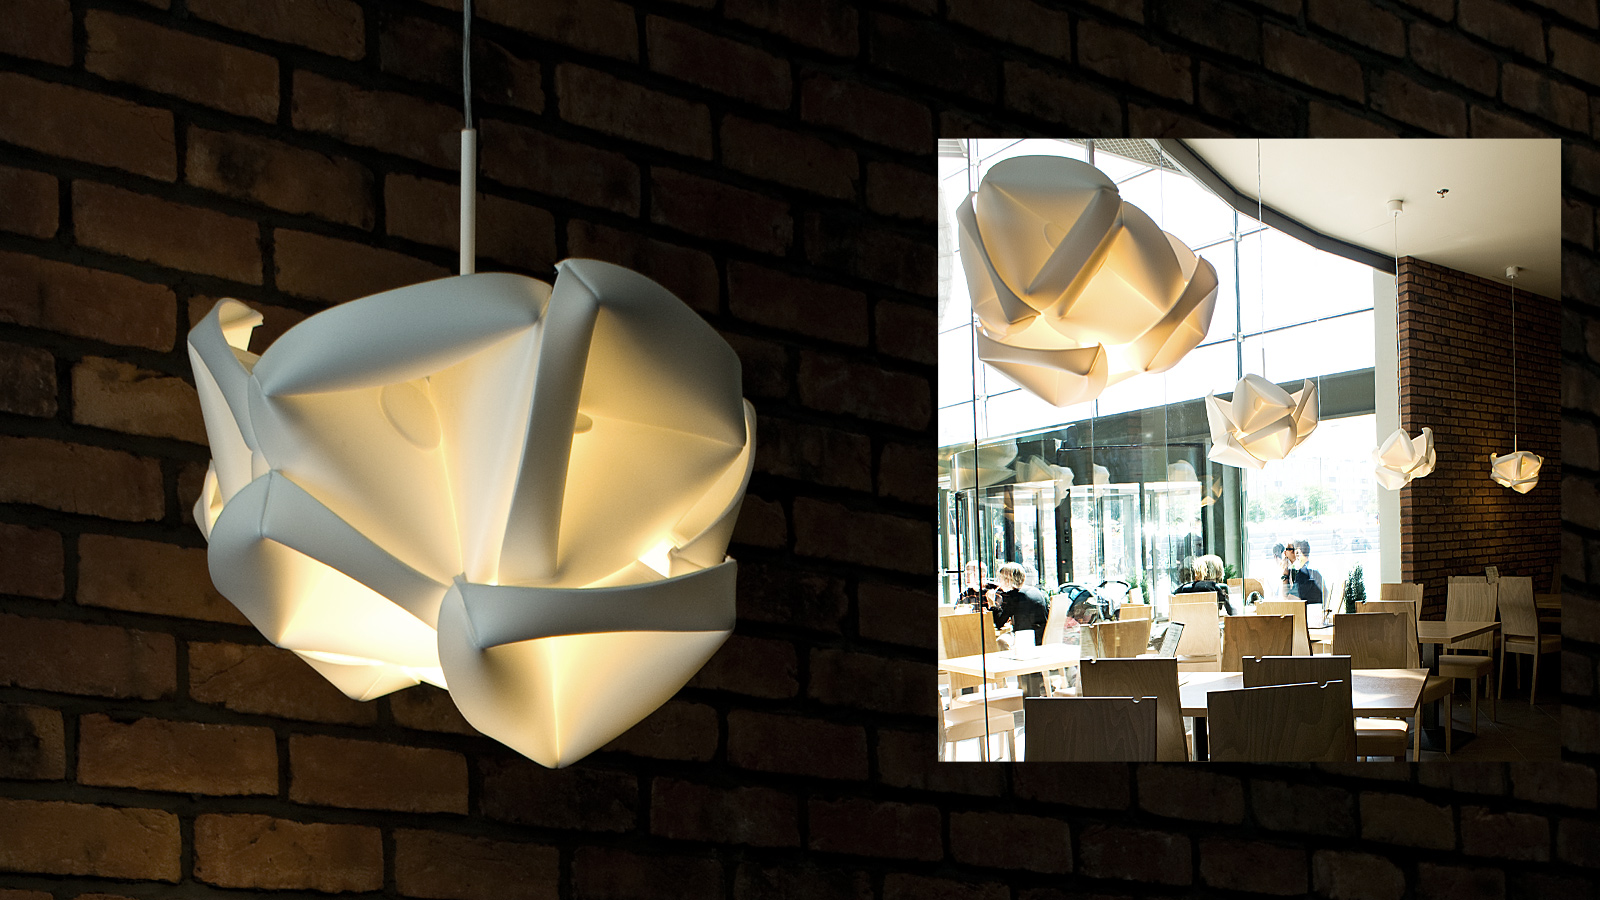 RENOVATION lamps in the interiors of KFC restaurant in «Cuprum Arena» mall, Lubin, Poland